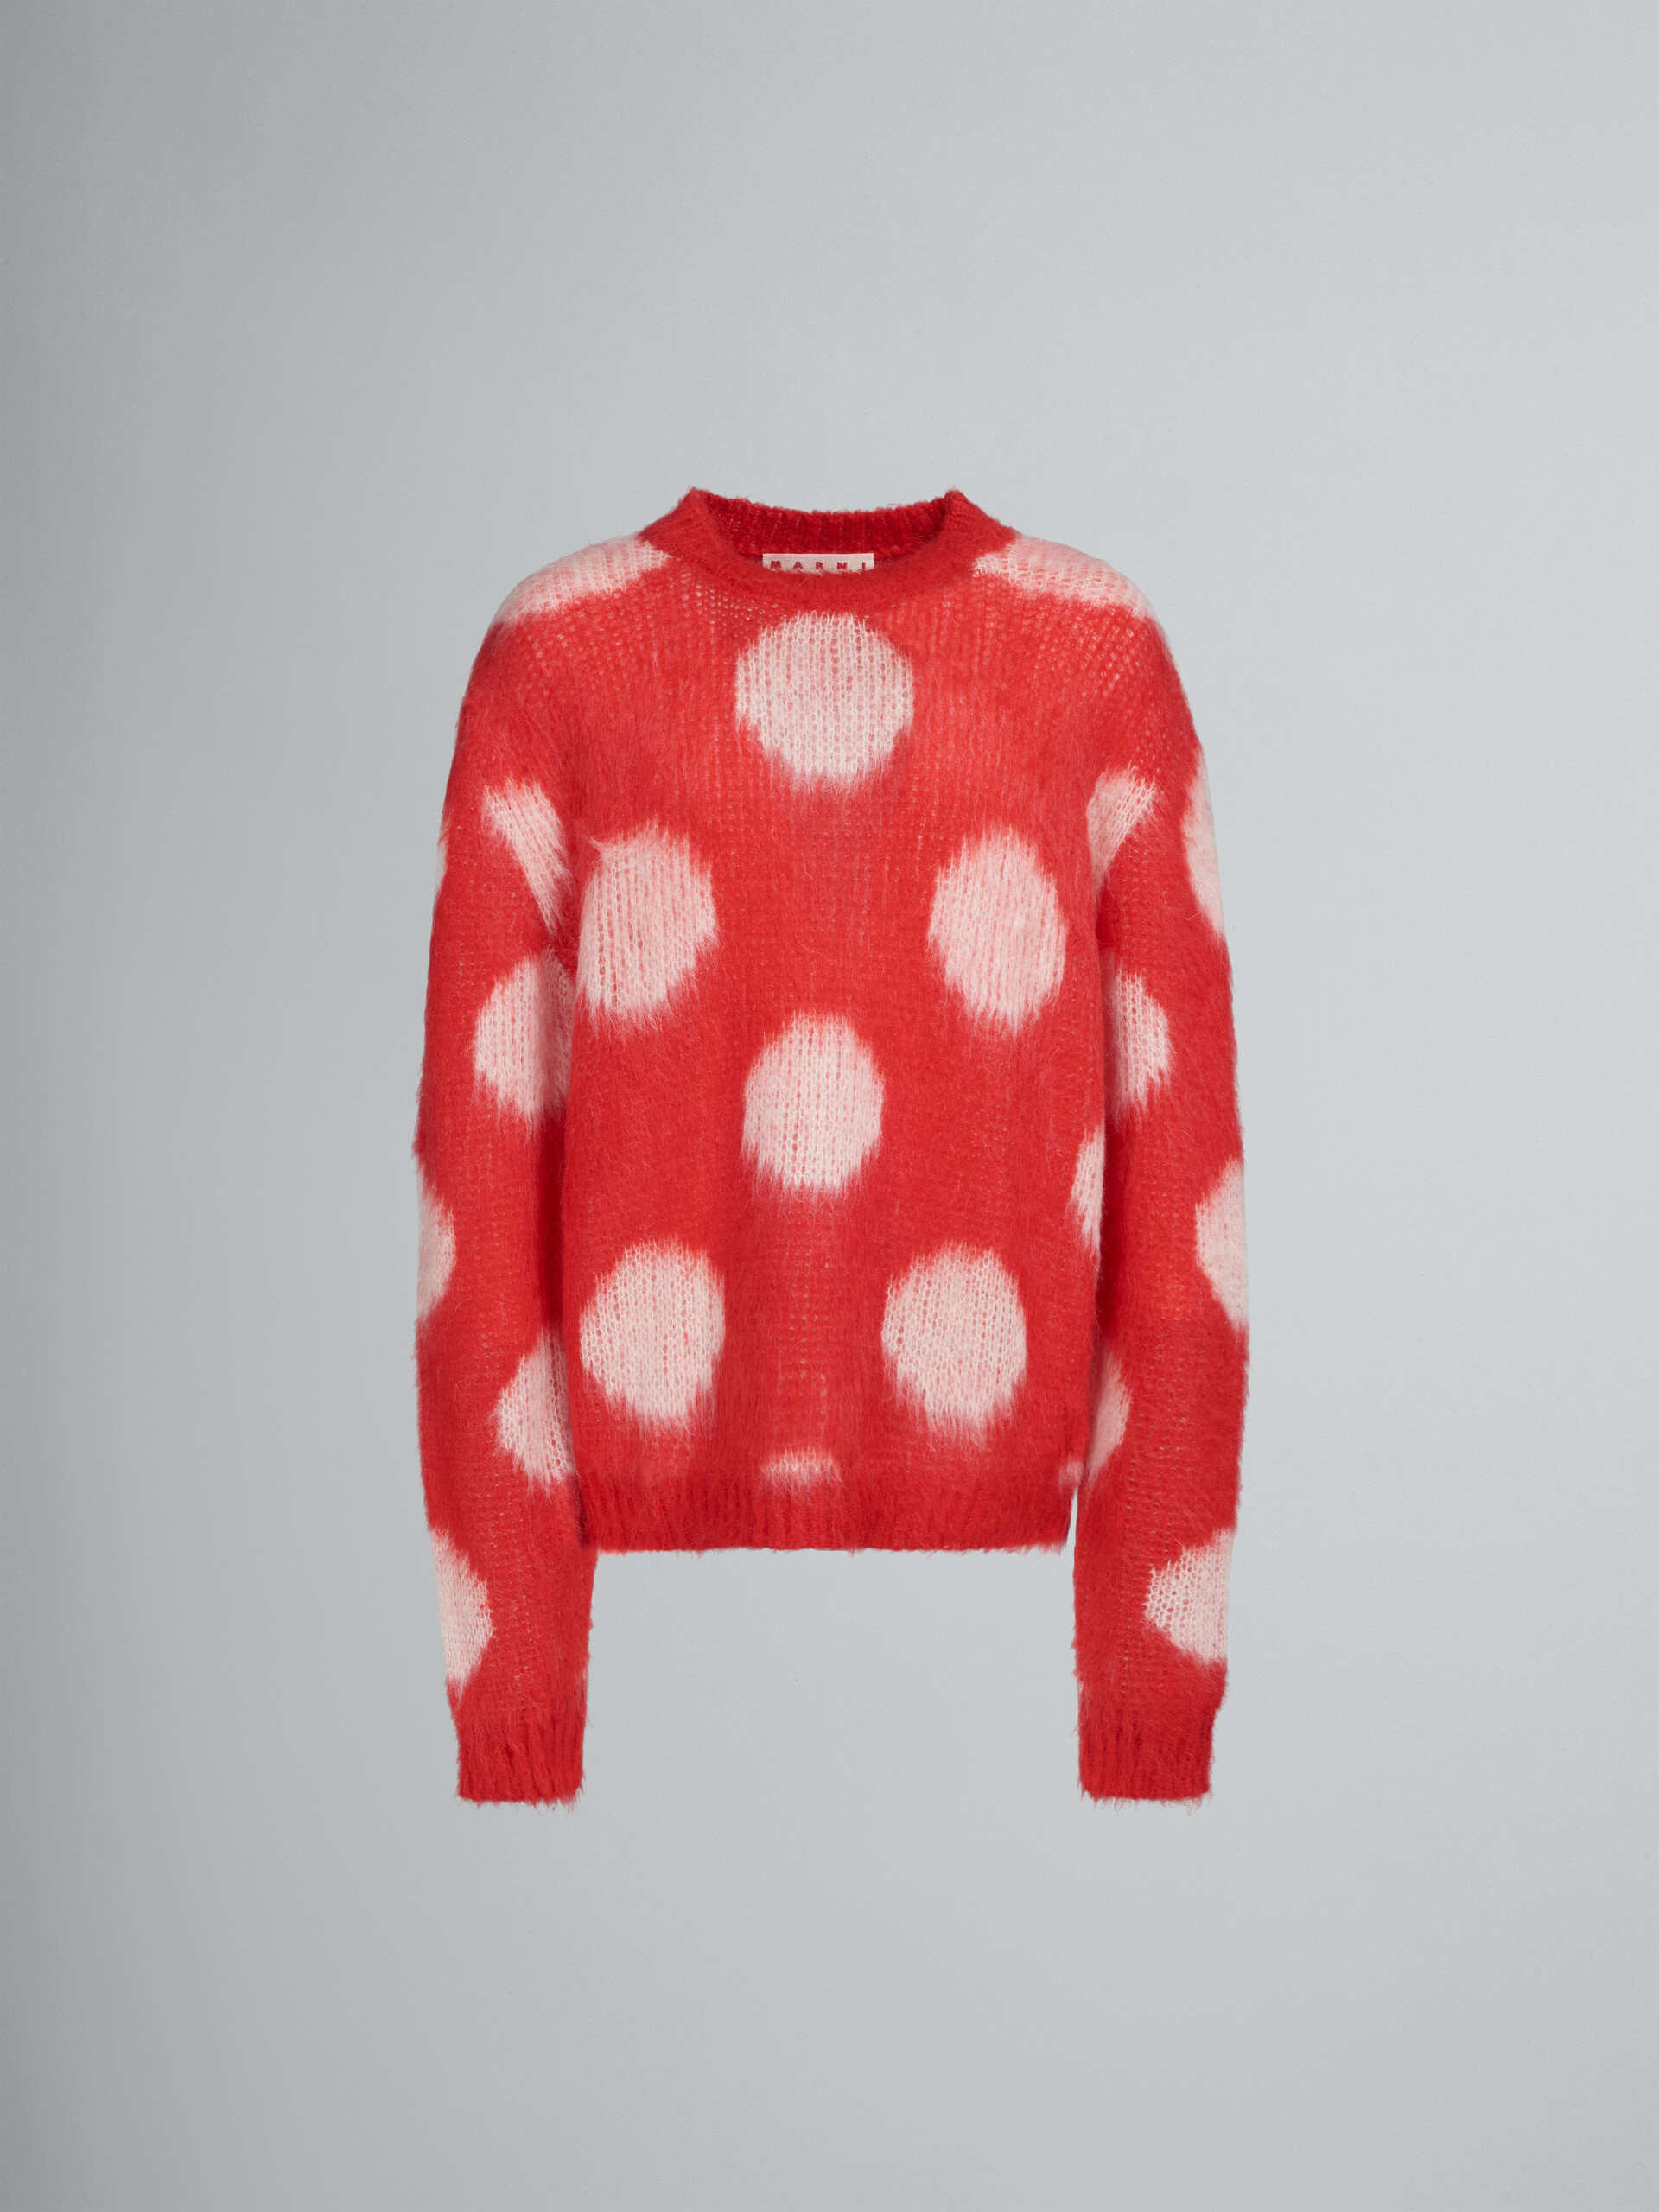 Red mohair jumper with maxi polka dots - Pullovers - Image 1